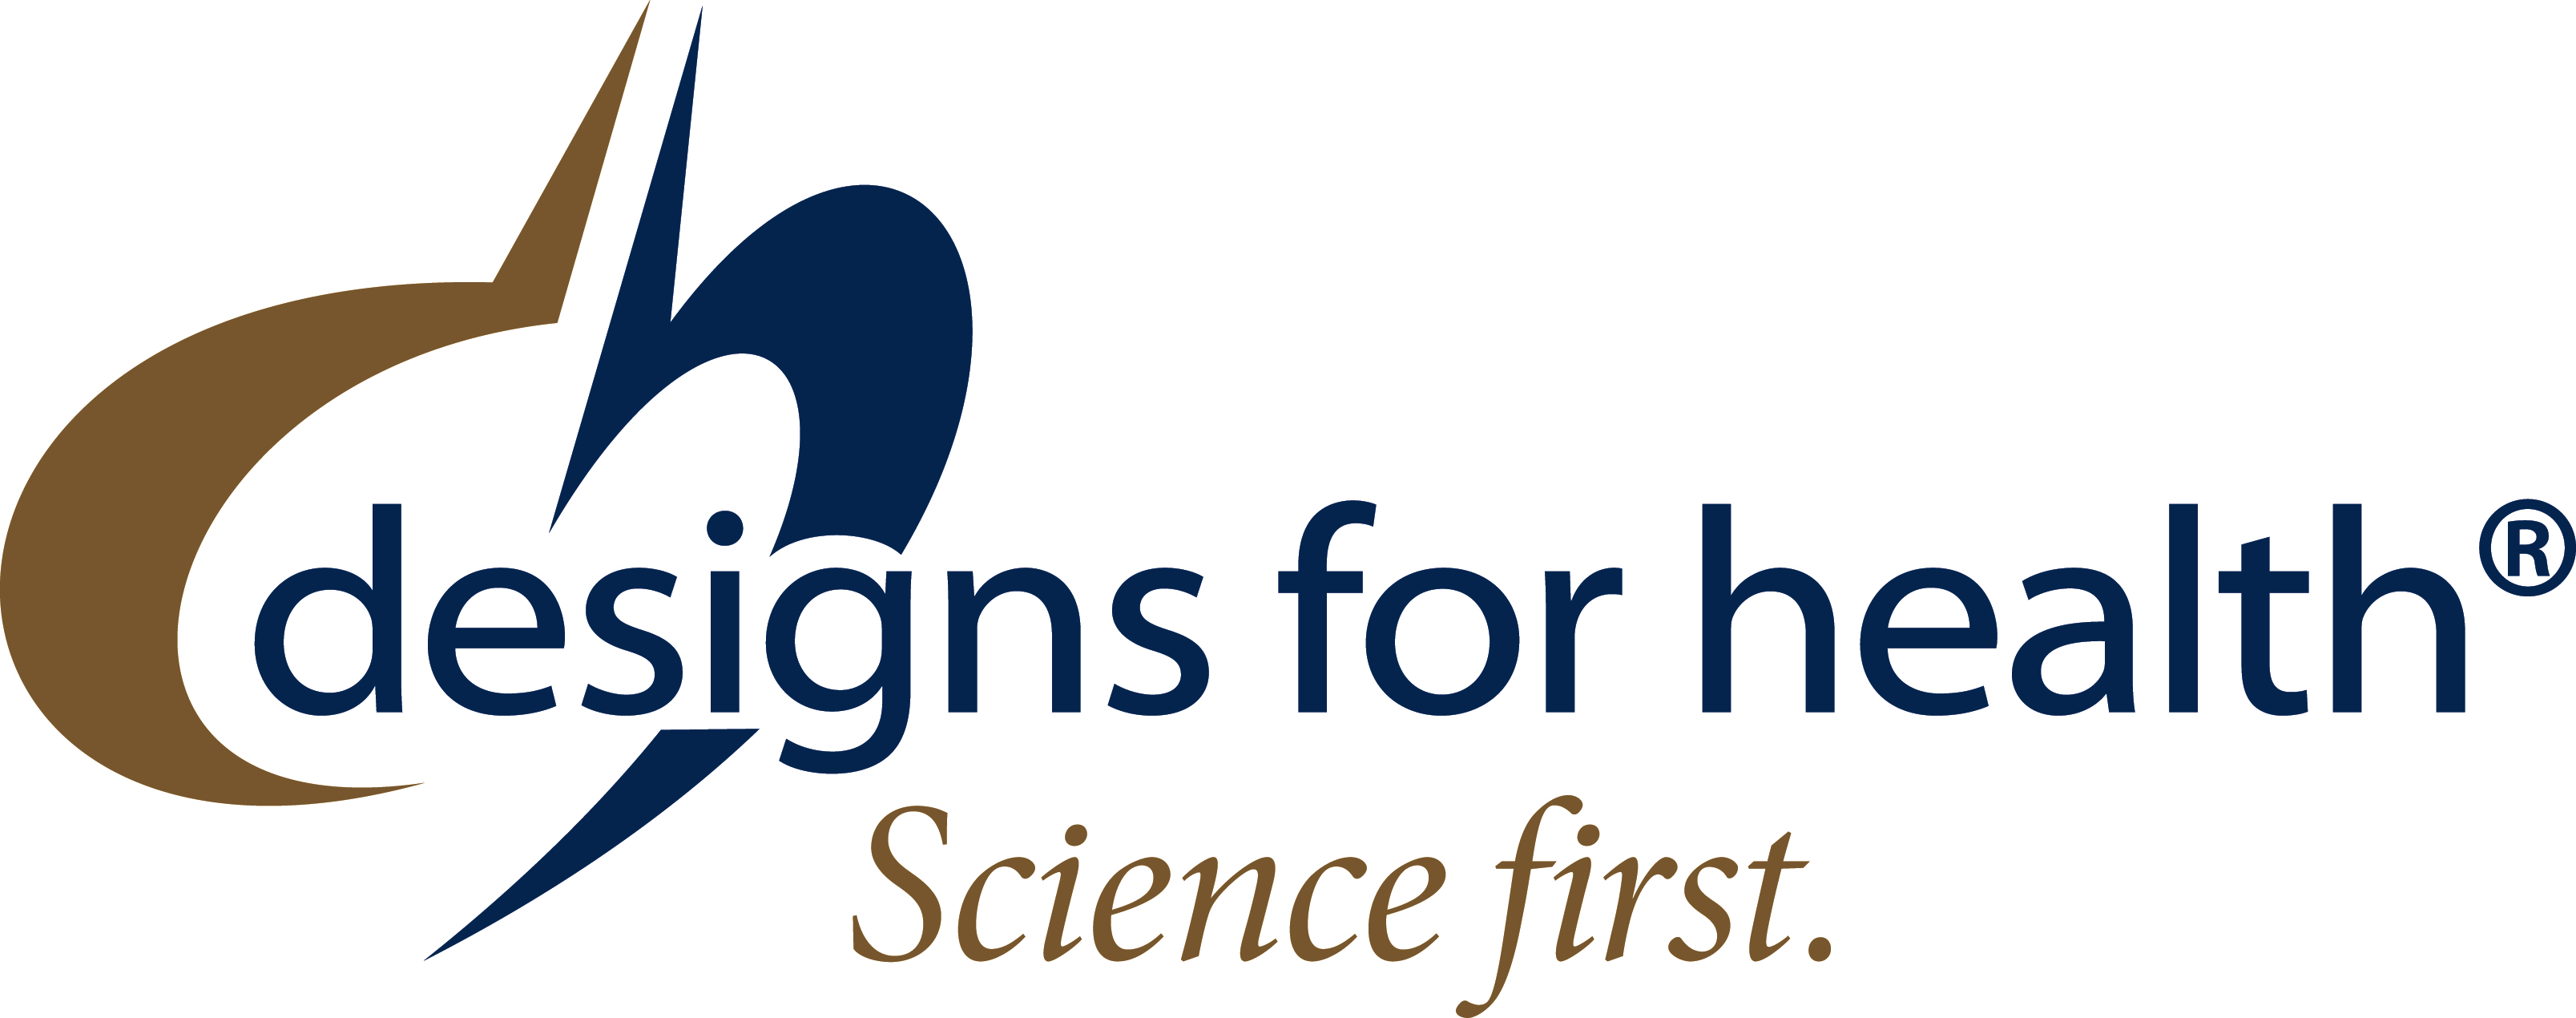 Designs for Health - Science First.